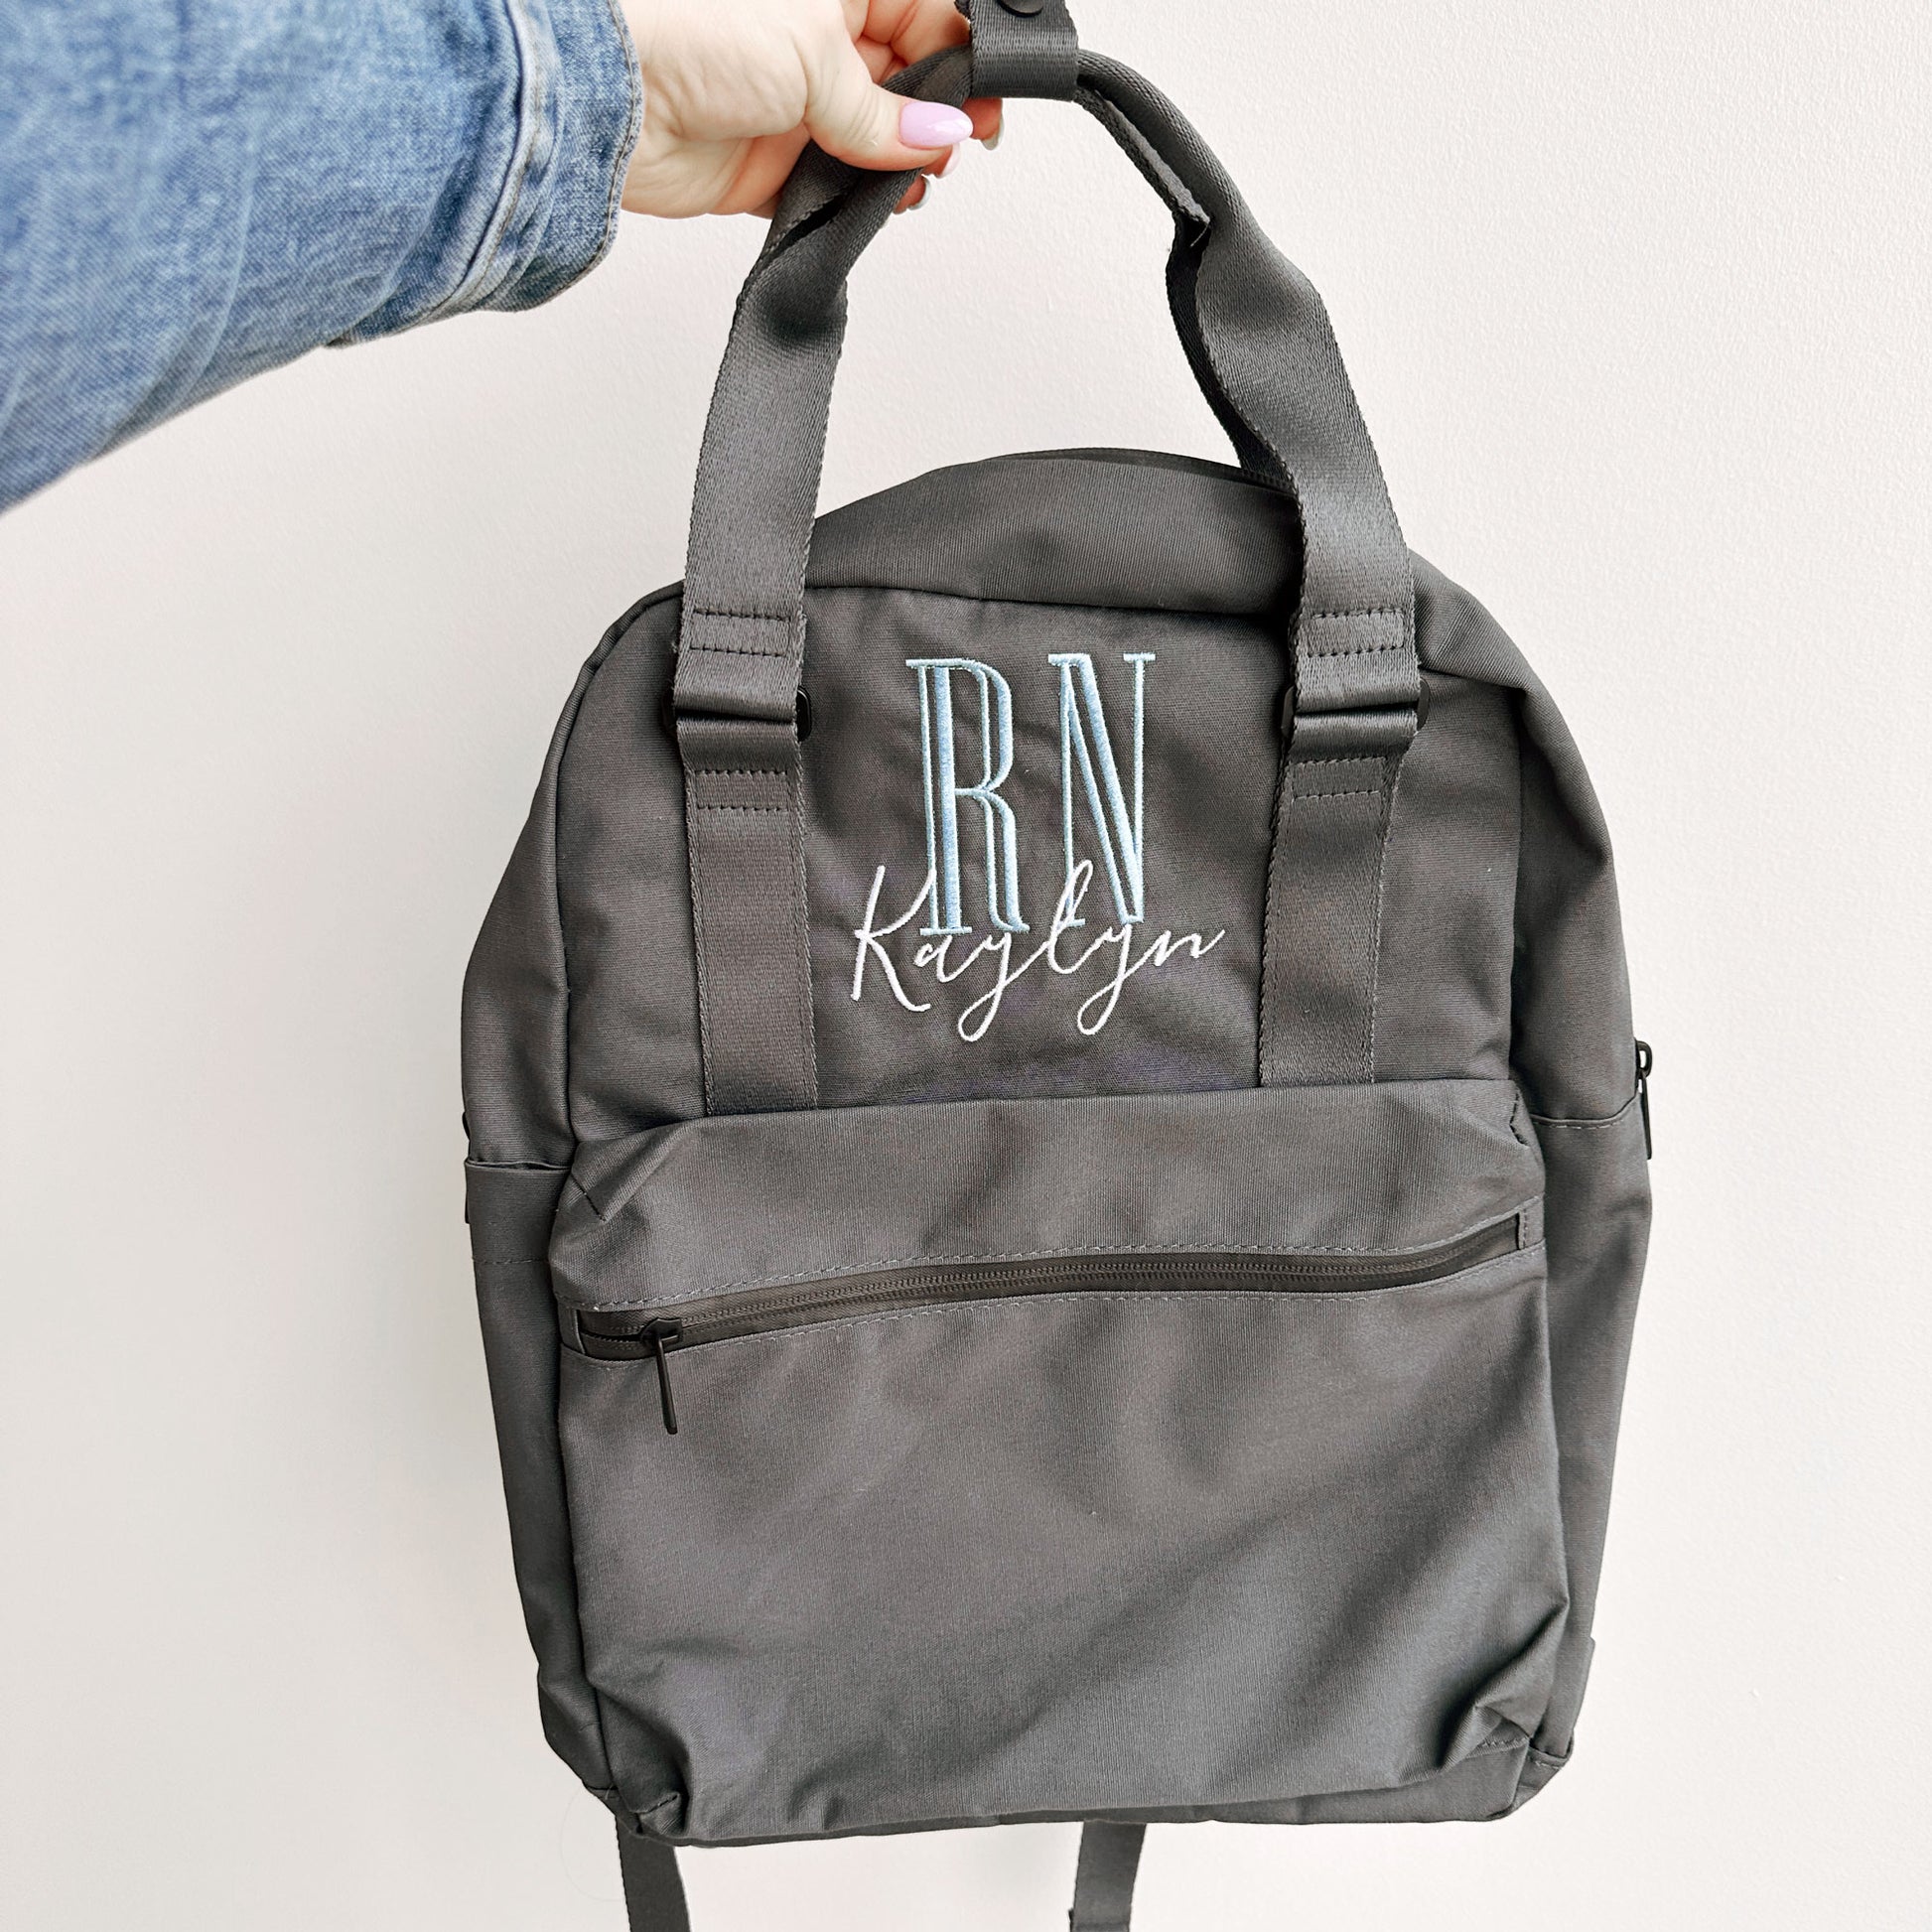 backpack for nurses with custom embroidered initials and name